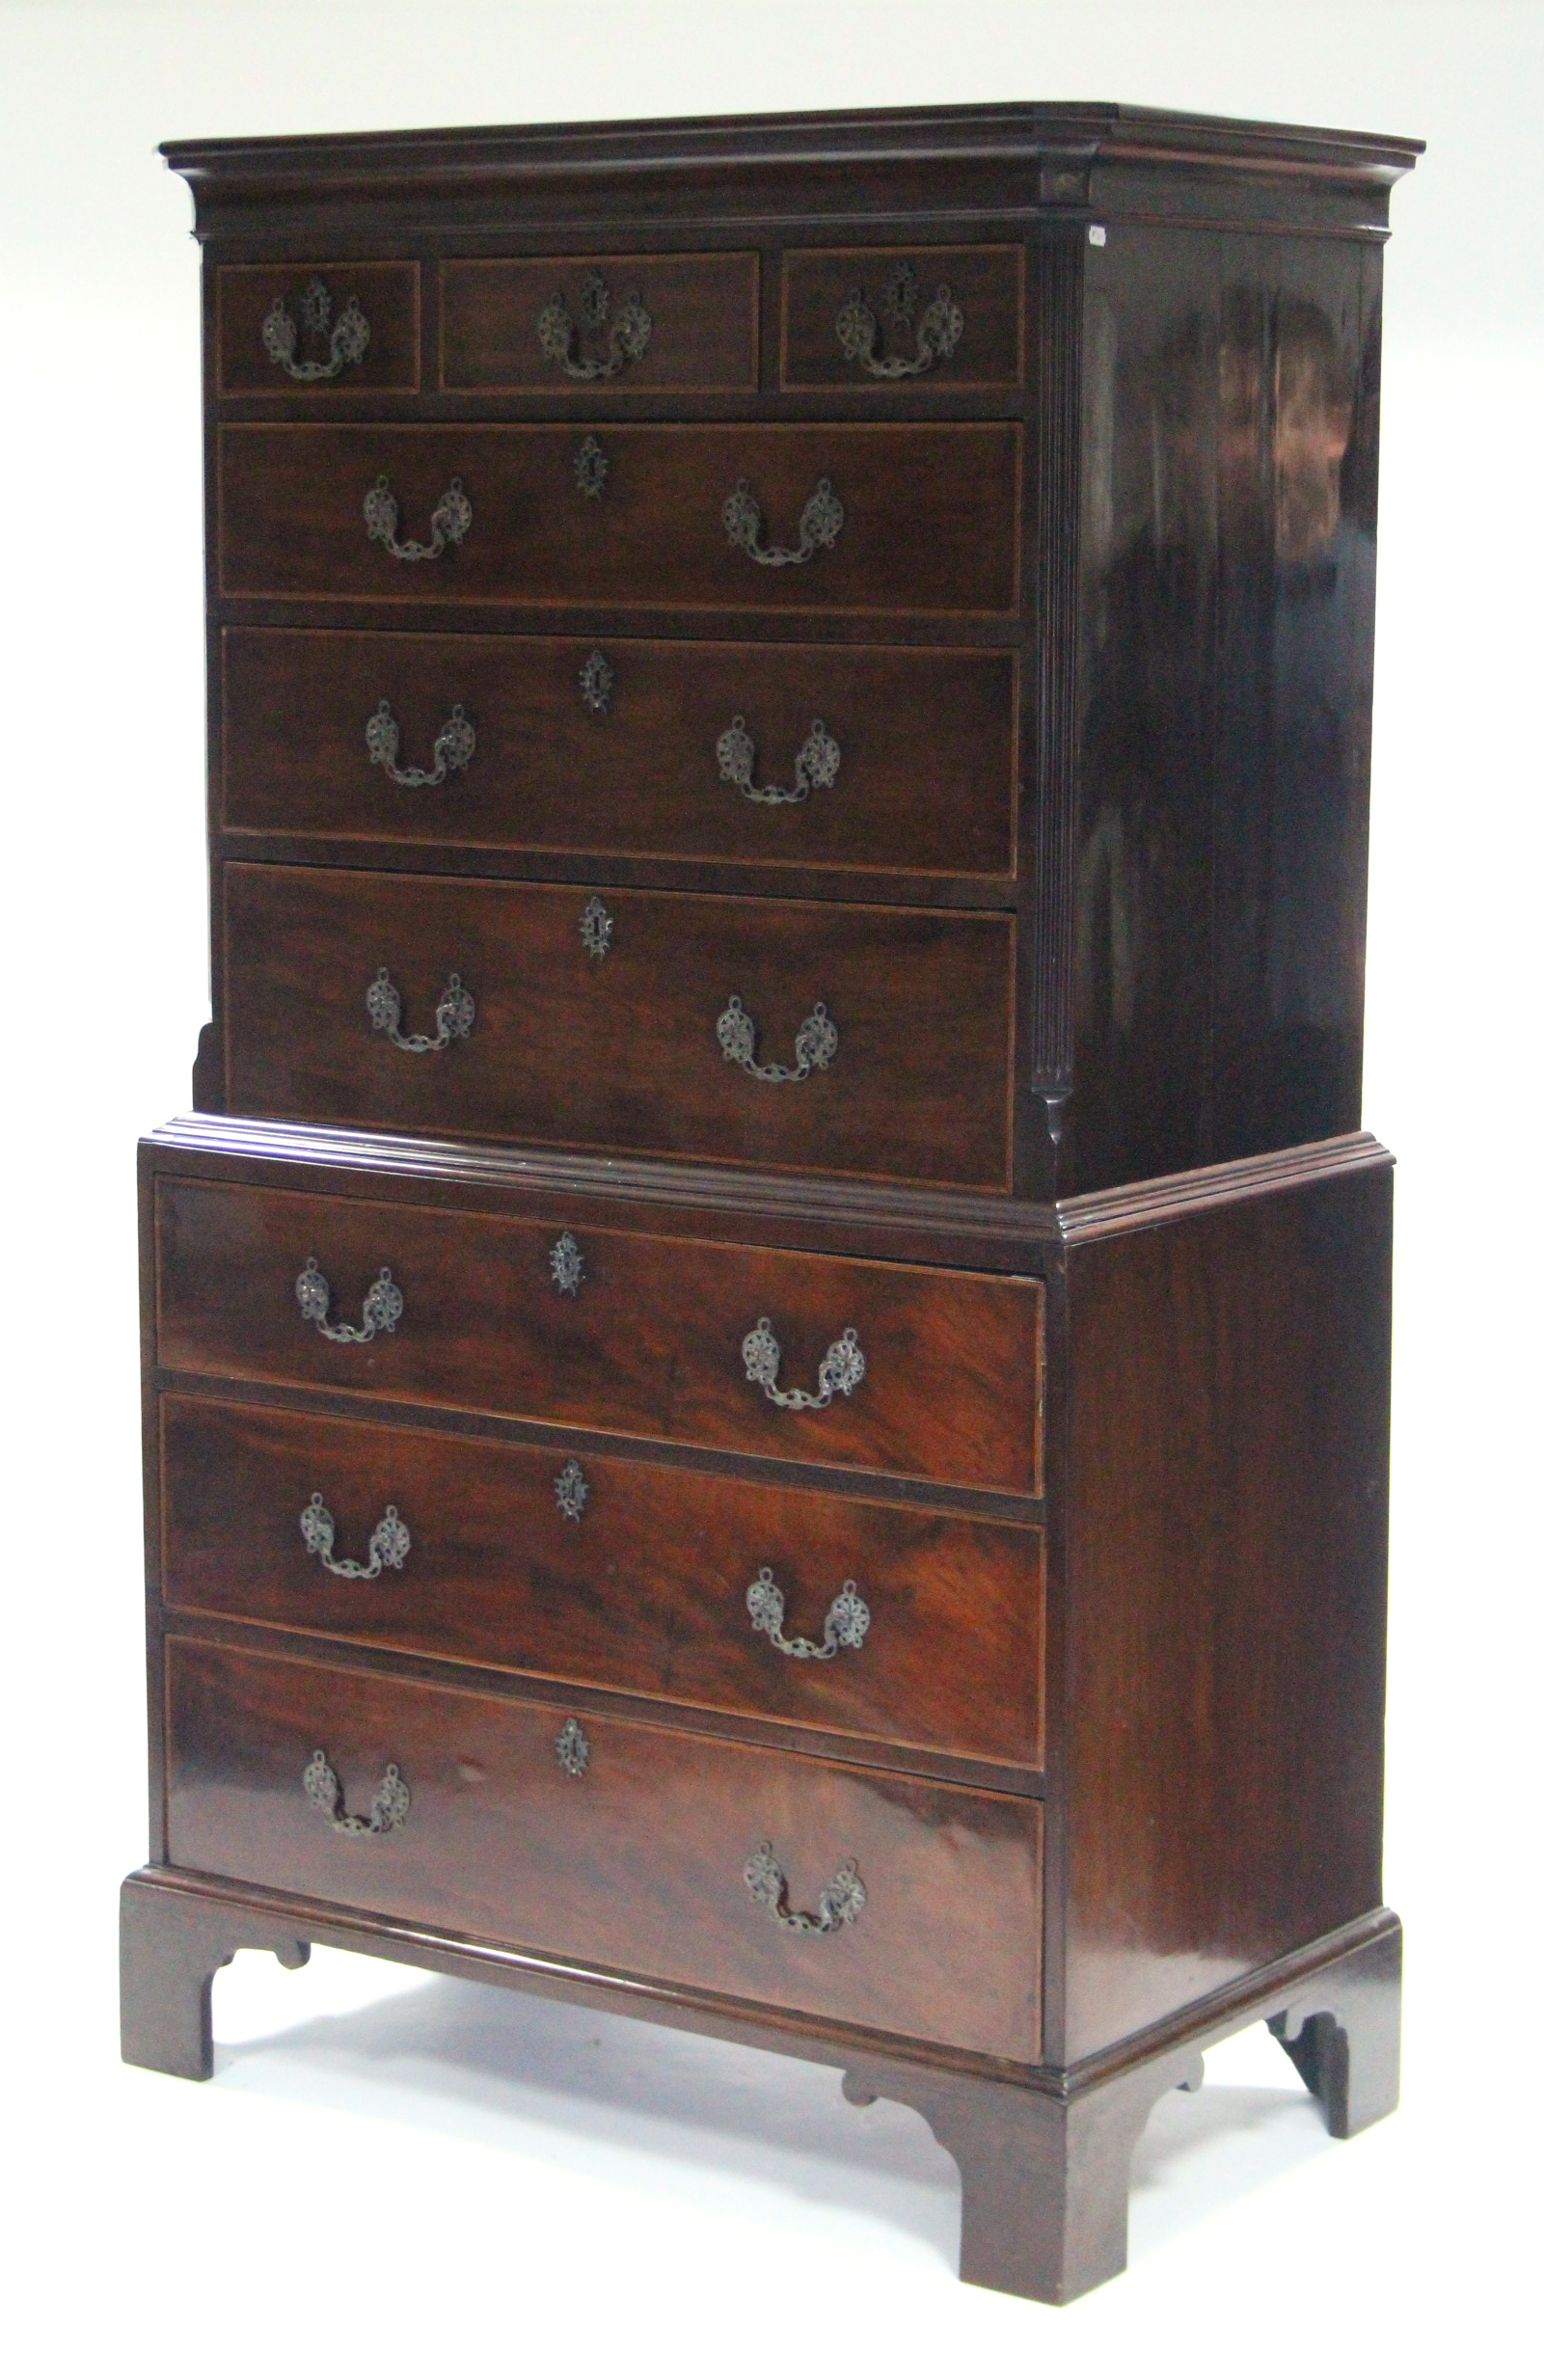 AN 18th century MAHOGANY CHEST-ON-CHEST, the upper part with cavetto cornice & fluted canted